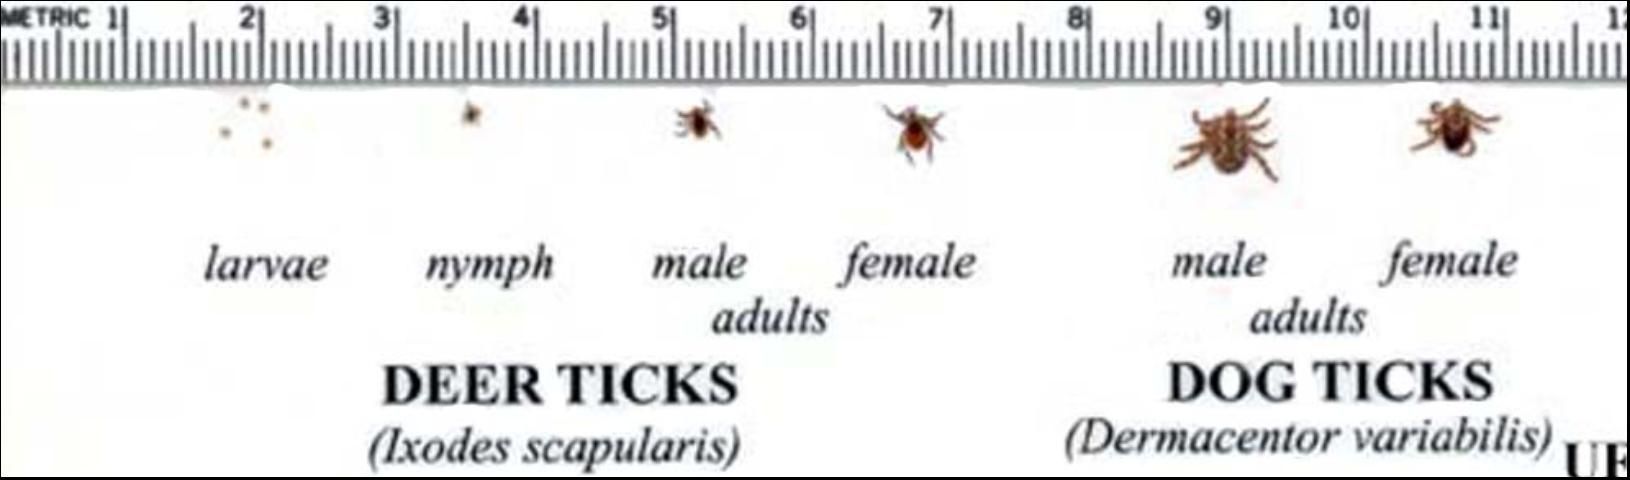 Figure 6. The life cycle and approximate sizes of the blacklegged tick, Ixodes scapularis Say, compared with the American dog tick, Dermacentor variabilis Say.